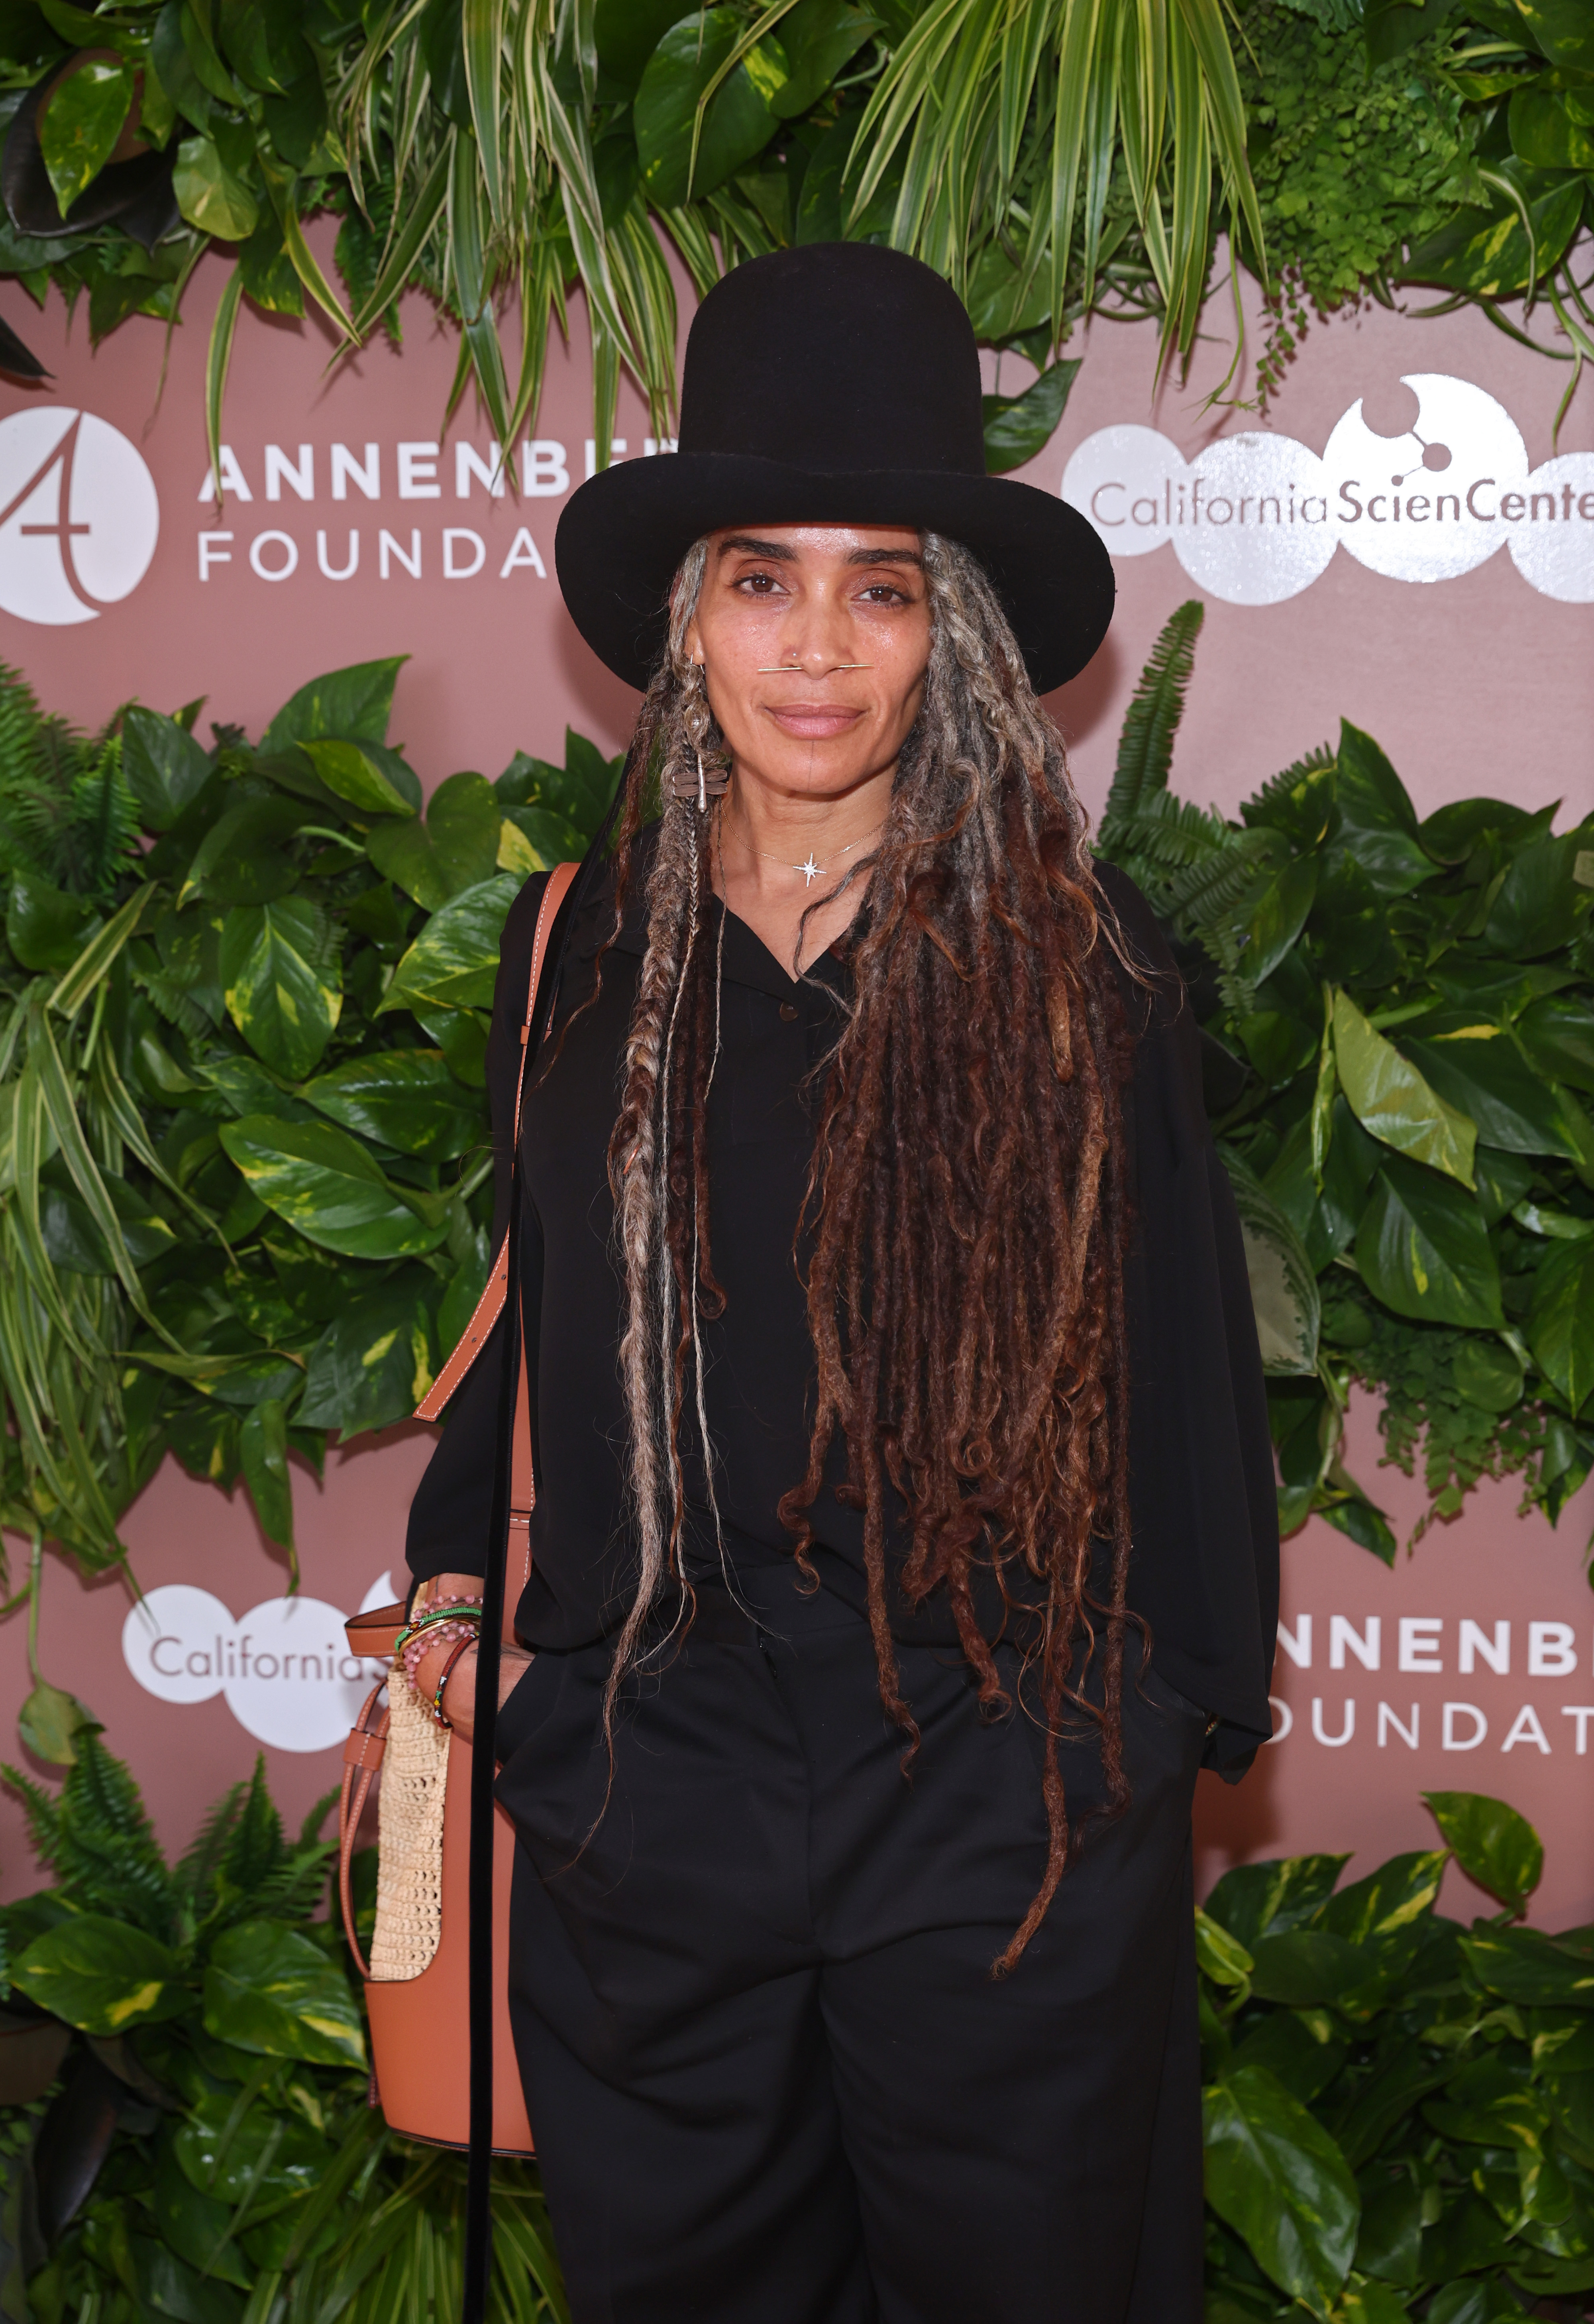 Lisa Bonet at the Annenberg Foundation presentation of the North American premiere of "Amazônia: Photography by Sebastião Salgado" in Los Angeles, California on October 19, 2022 | Source: Getty Images